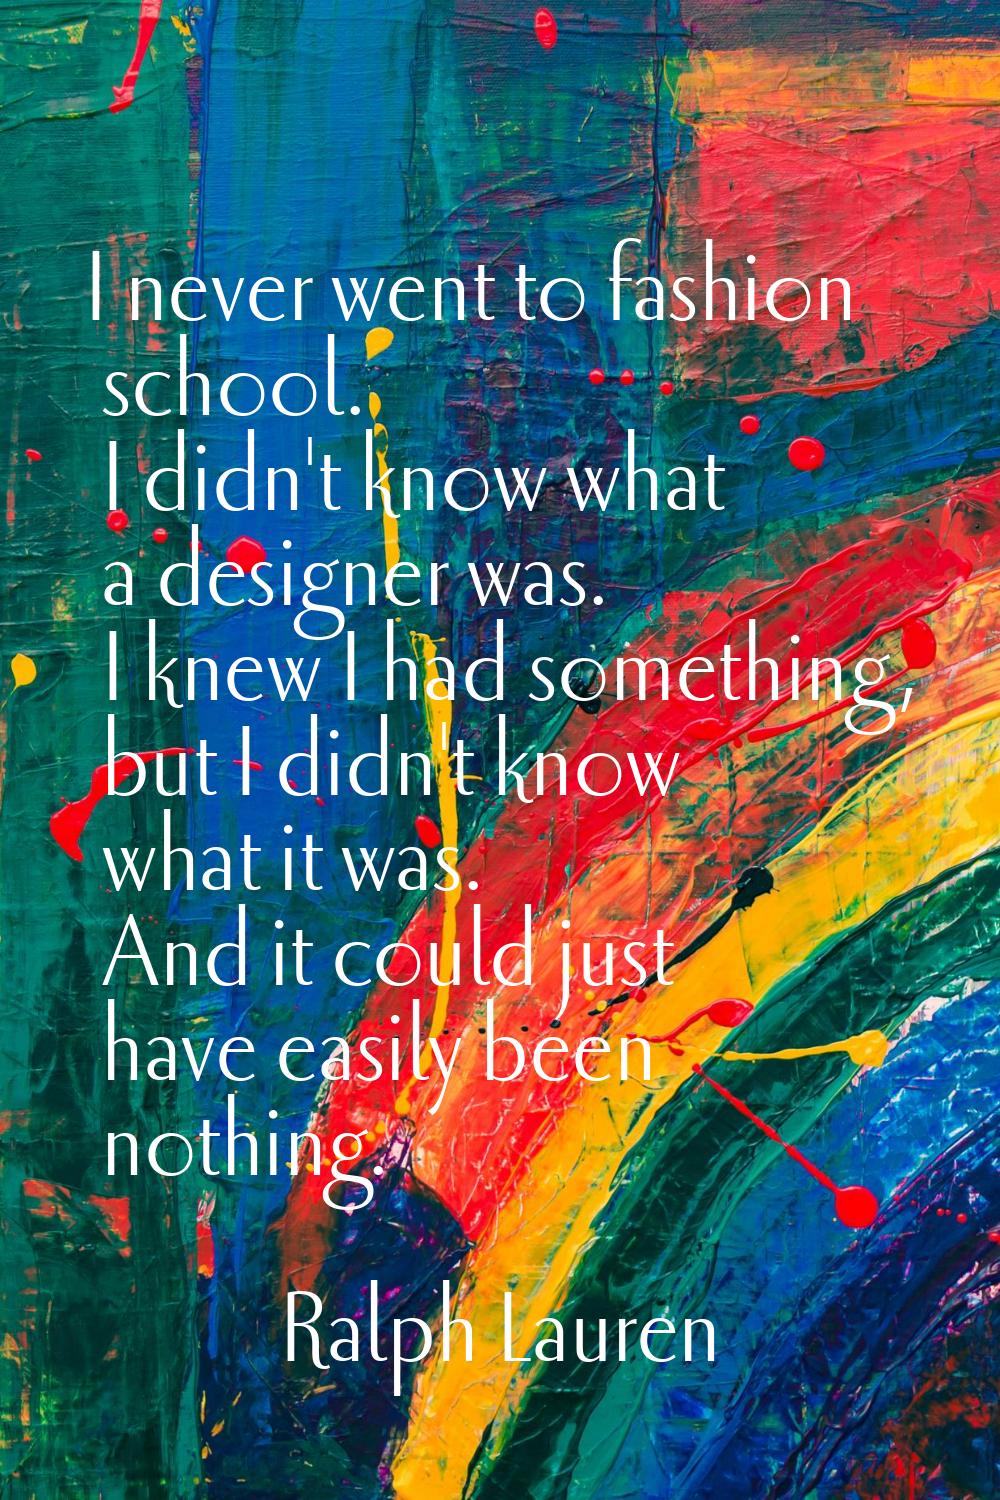 I never went to fashion school. I didn't know what a designer was. I knew I had something, but I di